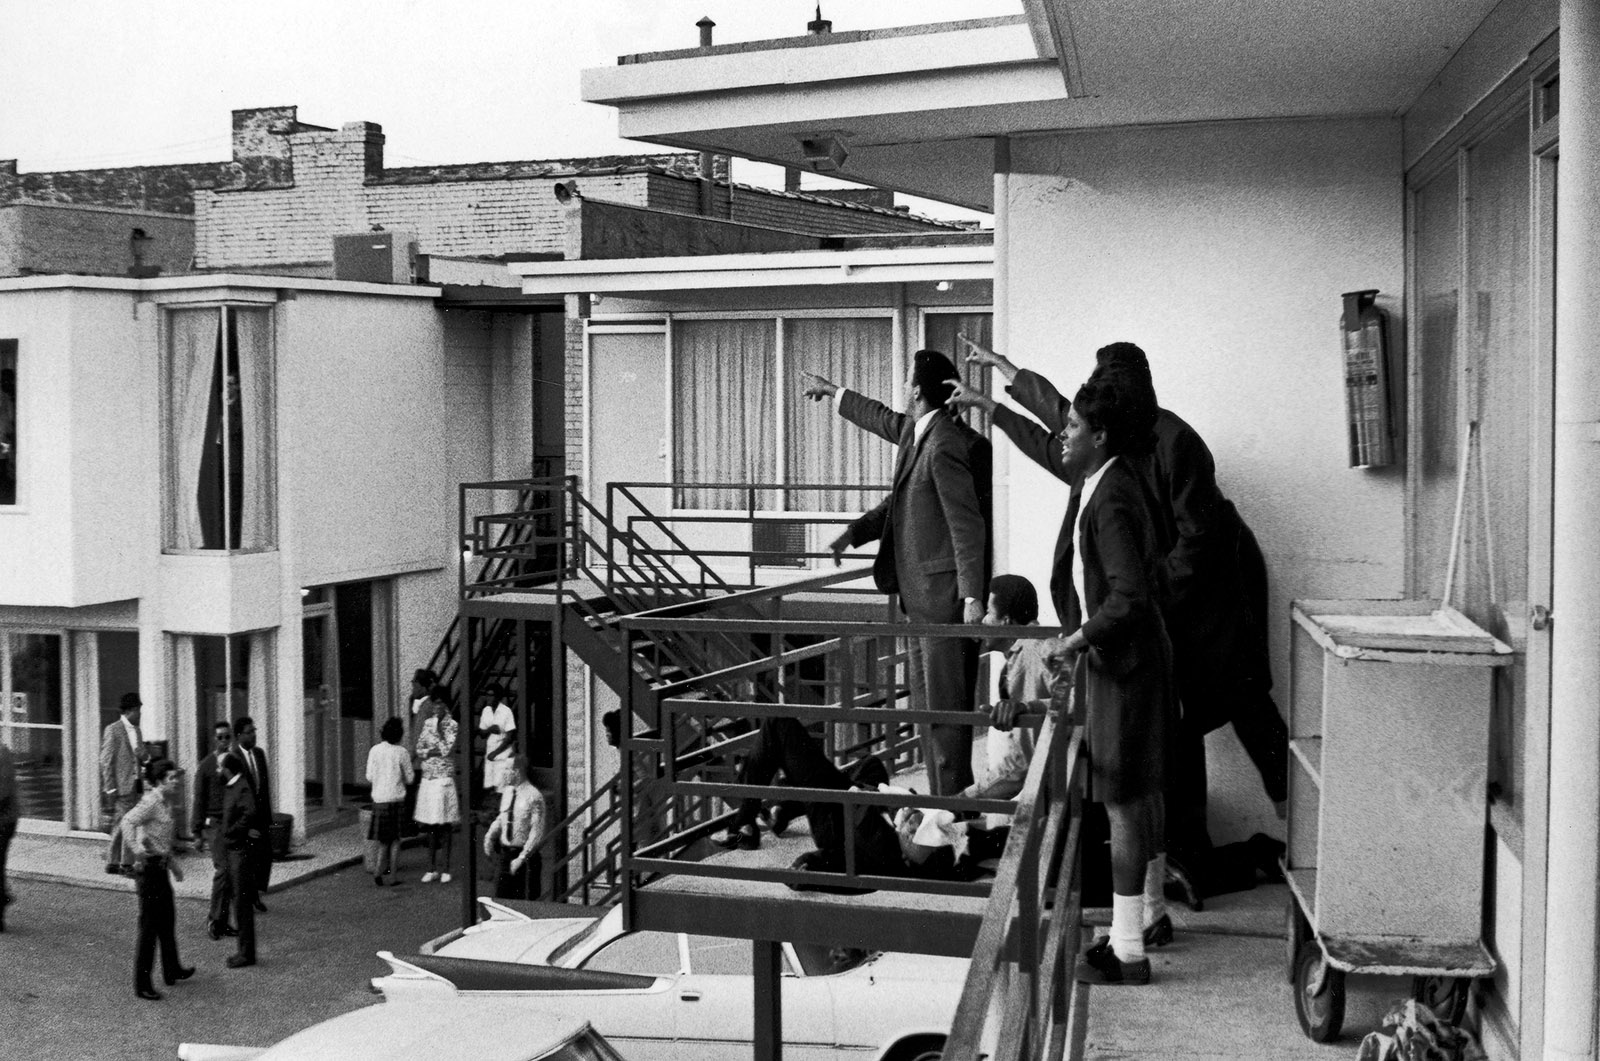 Associates of Dr. Martin Luther King Jr., the slain civil rights leader lying on the motel balcony, pointing in the direction of the assassin, Memphis, Tennessee, April 4, 1968